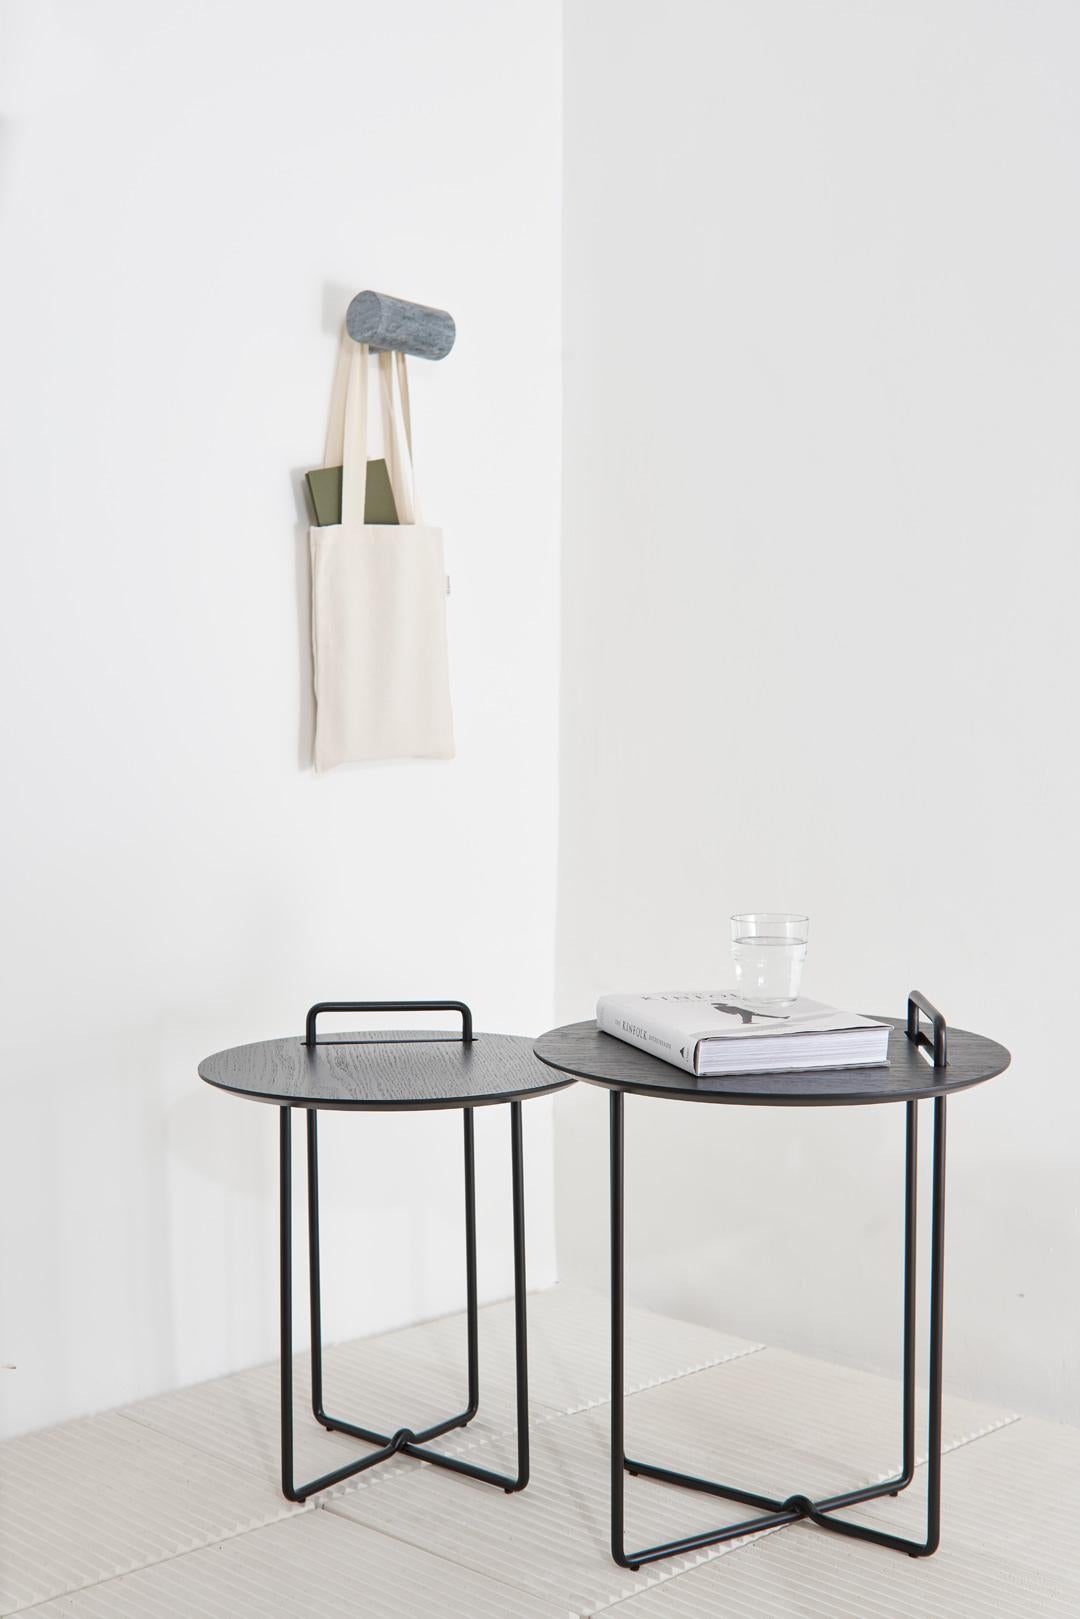 Sense Due Collection, Wood and Steel Ebonized Side Tables (Set of 2) In New Condition For Sale In Santa Edwiges, MG